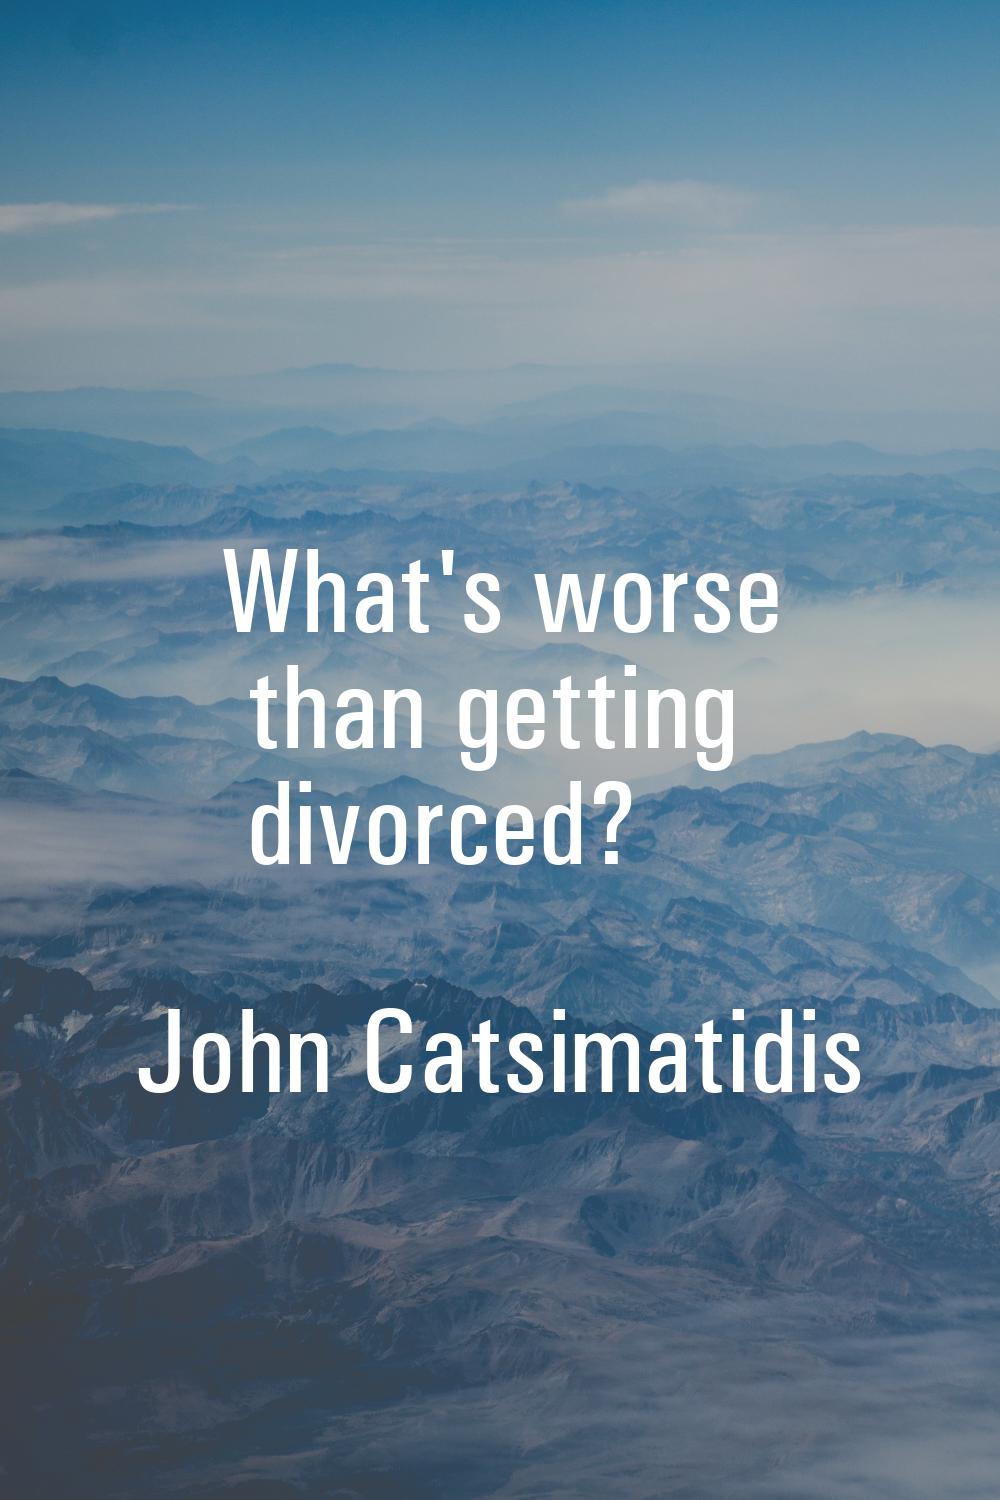 What's worse than getting divorced?